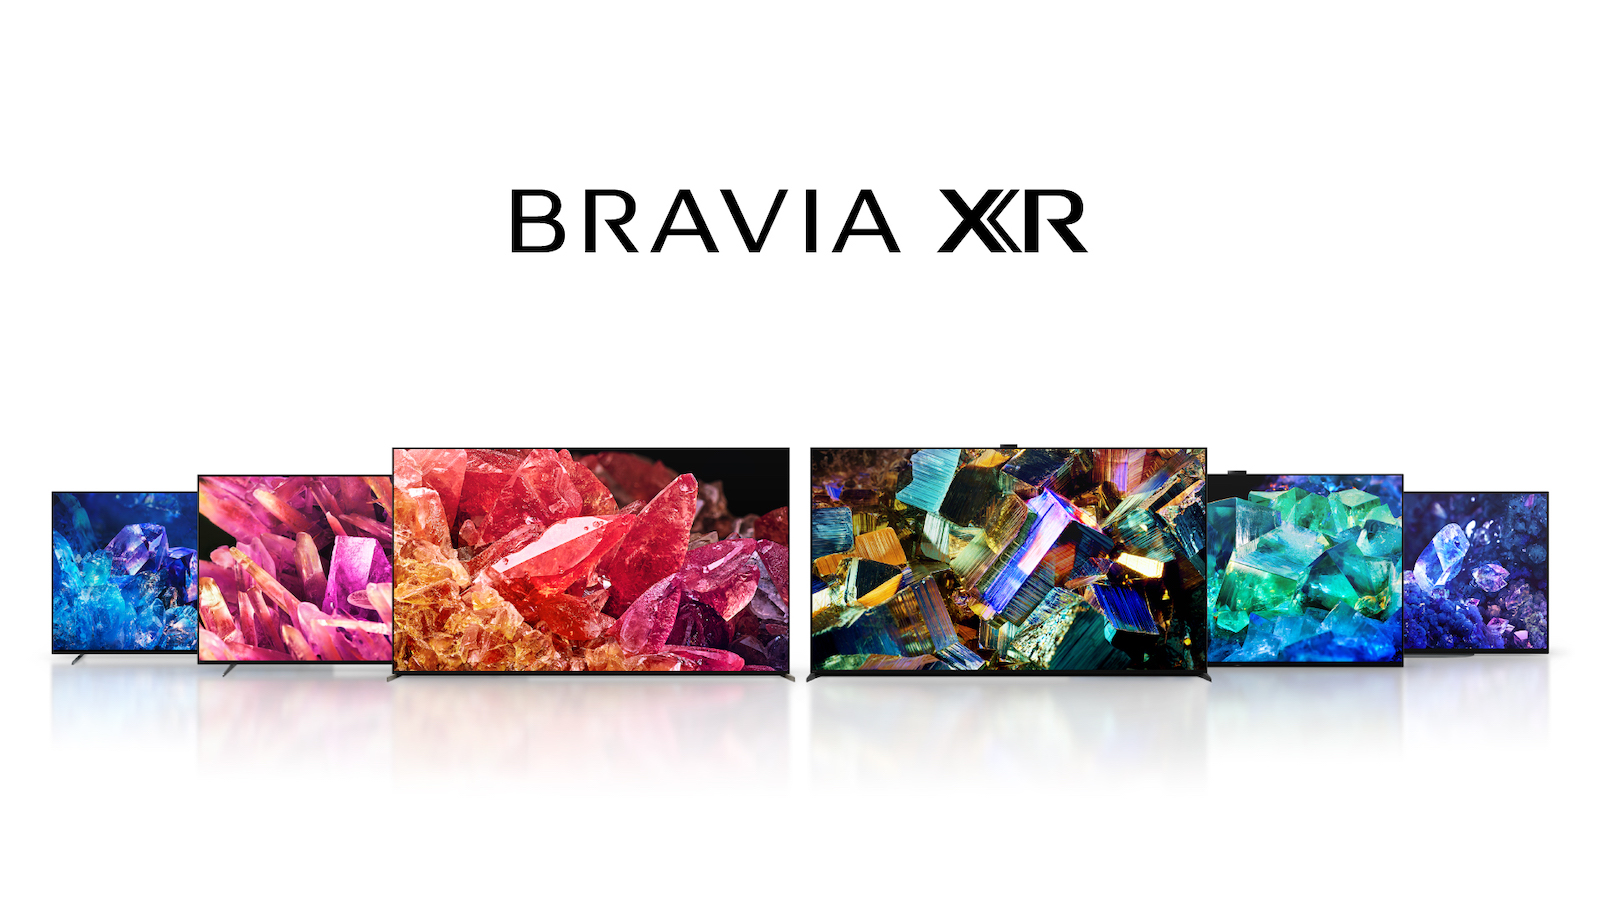 First “OLED EX” TVs announced, promising brighter high-contrast picture